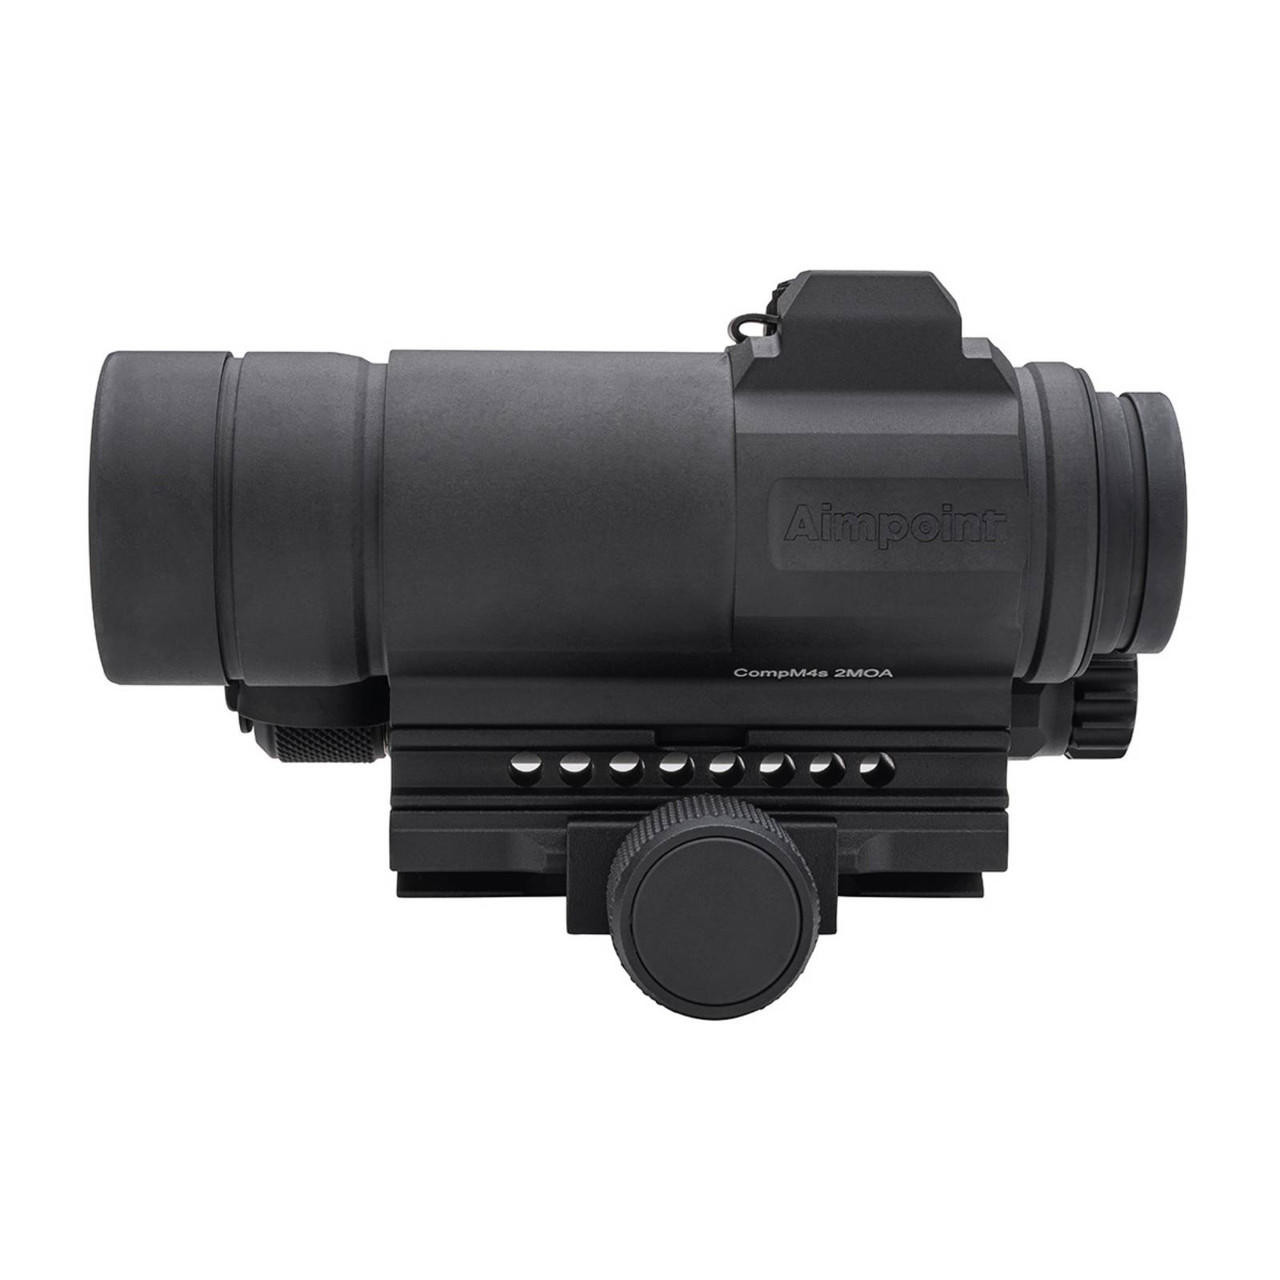 Aimpoint PRO Patrol Rifle Optic 2 MOA Red Dot Sight w/ QRP2 QD Mount & 39mm  Spacer